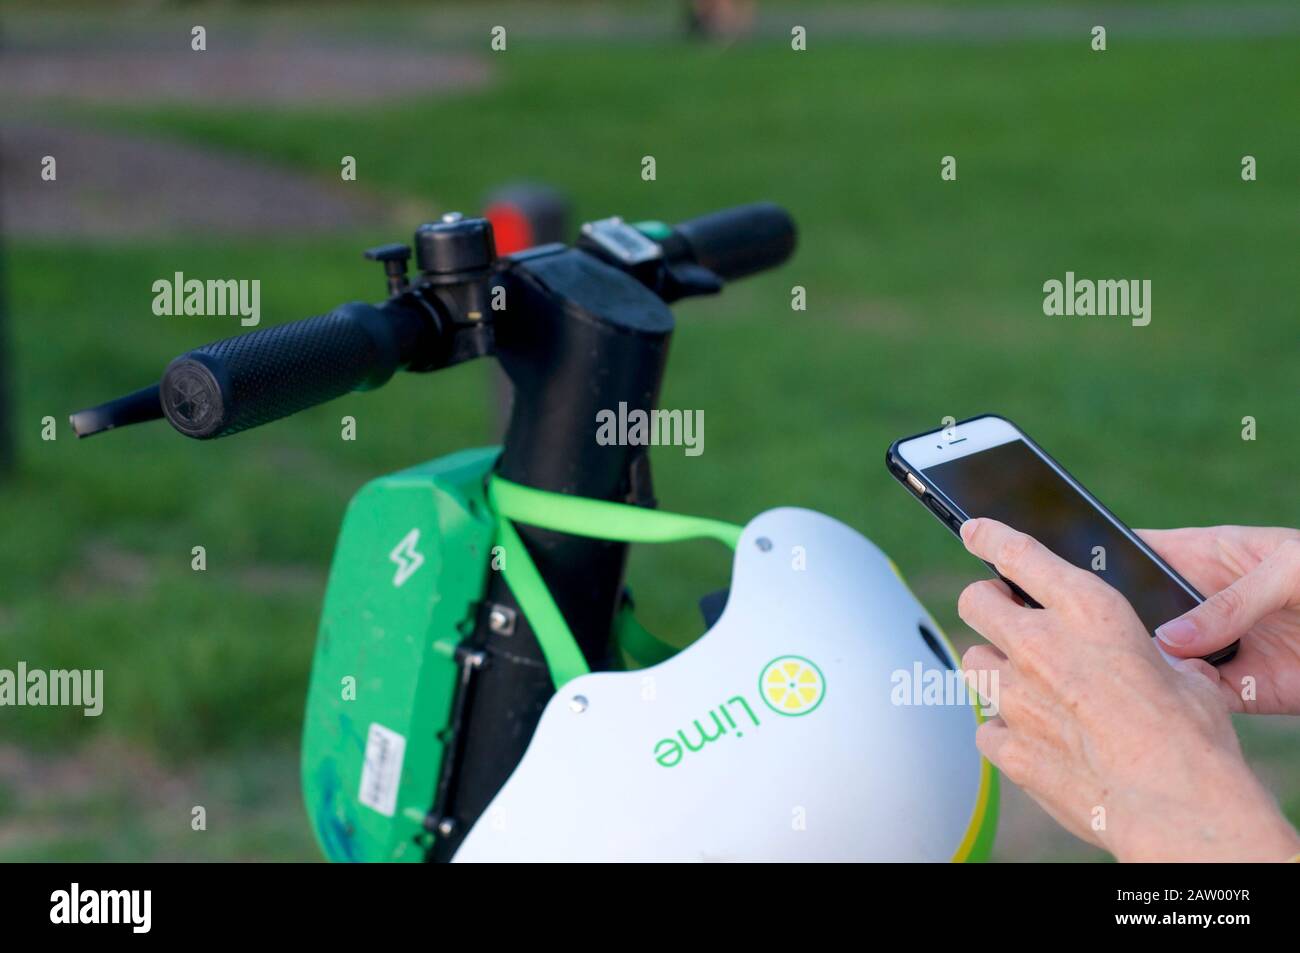 Brisbane, Queensland, Australia - 28th January 2020 : Close up of handlebars and scan symbol of a lime-S electric scooter and hand holding mobile phon Stock Photo